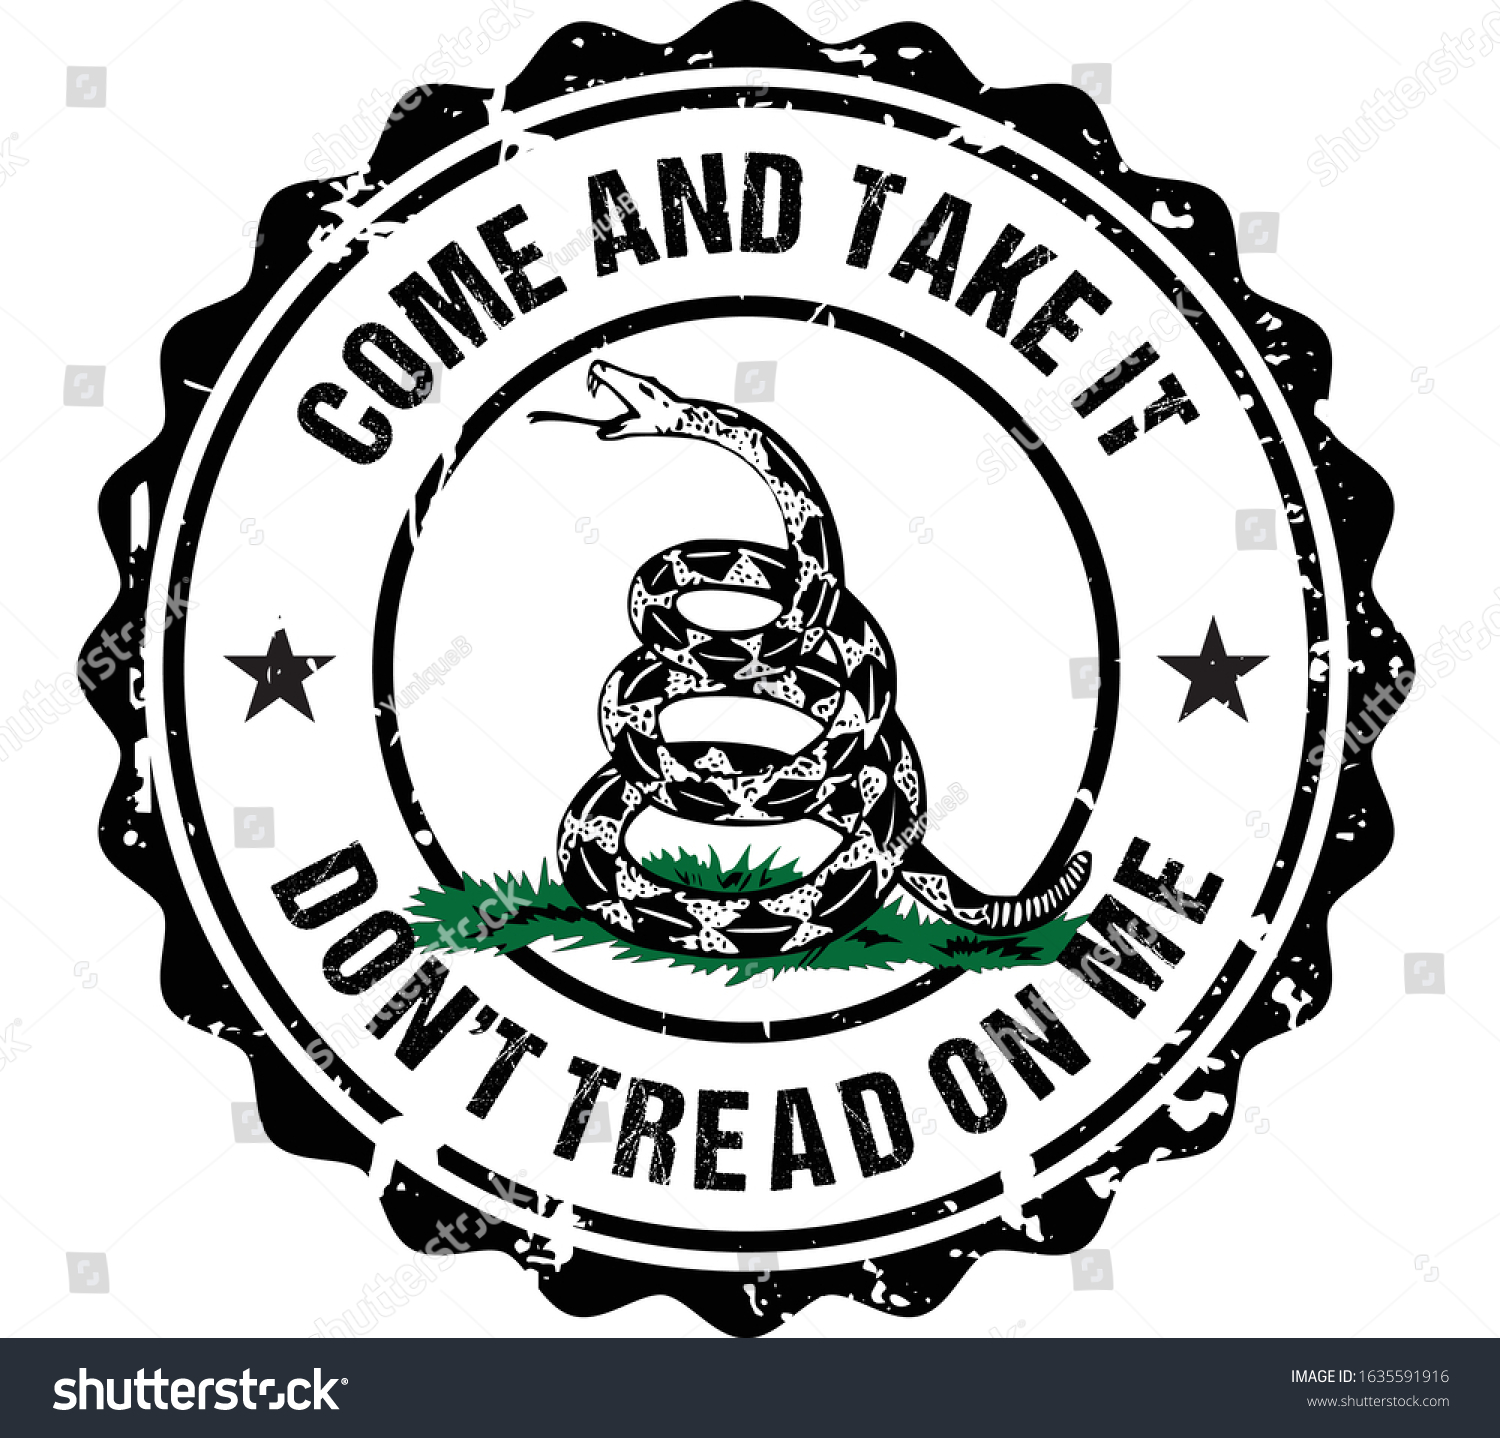 SVG of Grunge Don't Tread On Me, Come and Take It emblem for print, T-shirt or badge design. svg